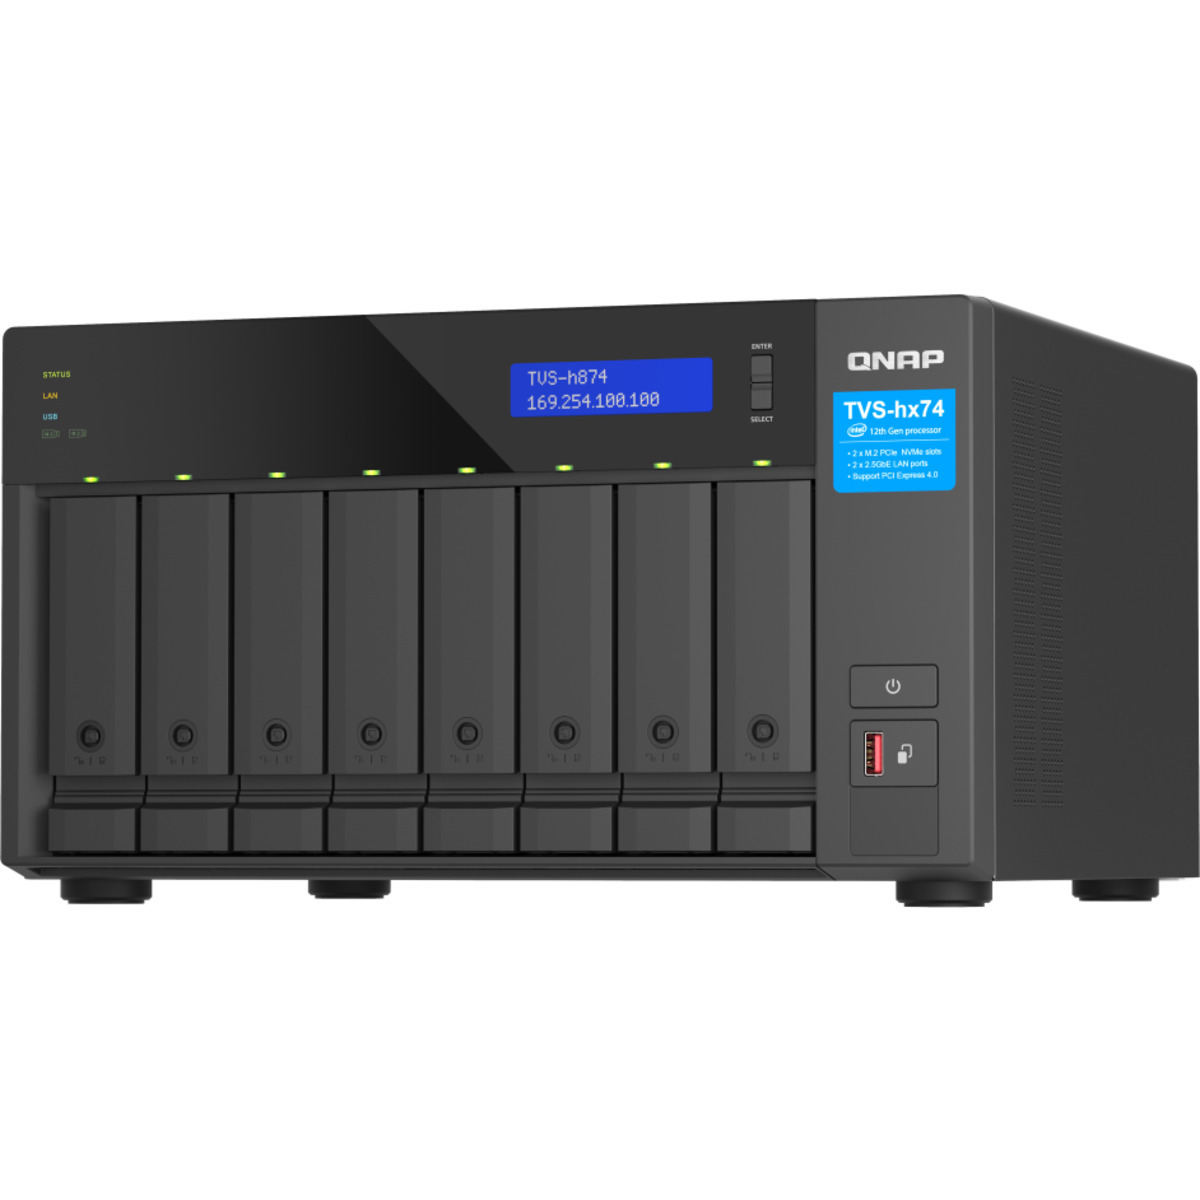 QNAP TVS-h874 Core i5 48tb 8-Bay Desktop Multimedia / Power User / Business NAS - Network Attached Storage Device 4x12tb Western Digital Ultrastar DC HC520 HUH721212ALE600 3.5 7200rpm SATA 6Gb/s HDD ENTERPRISE Class Drives Installed - Burn-In Tested TVS-h874 Core i5